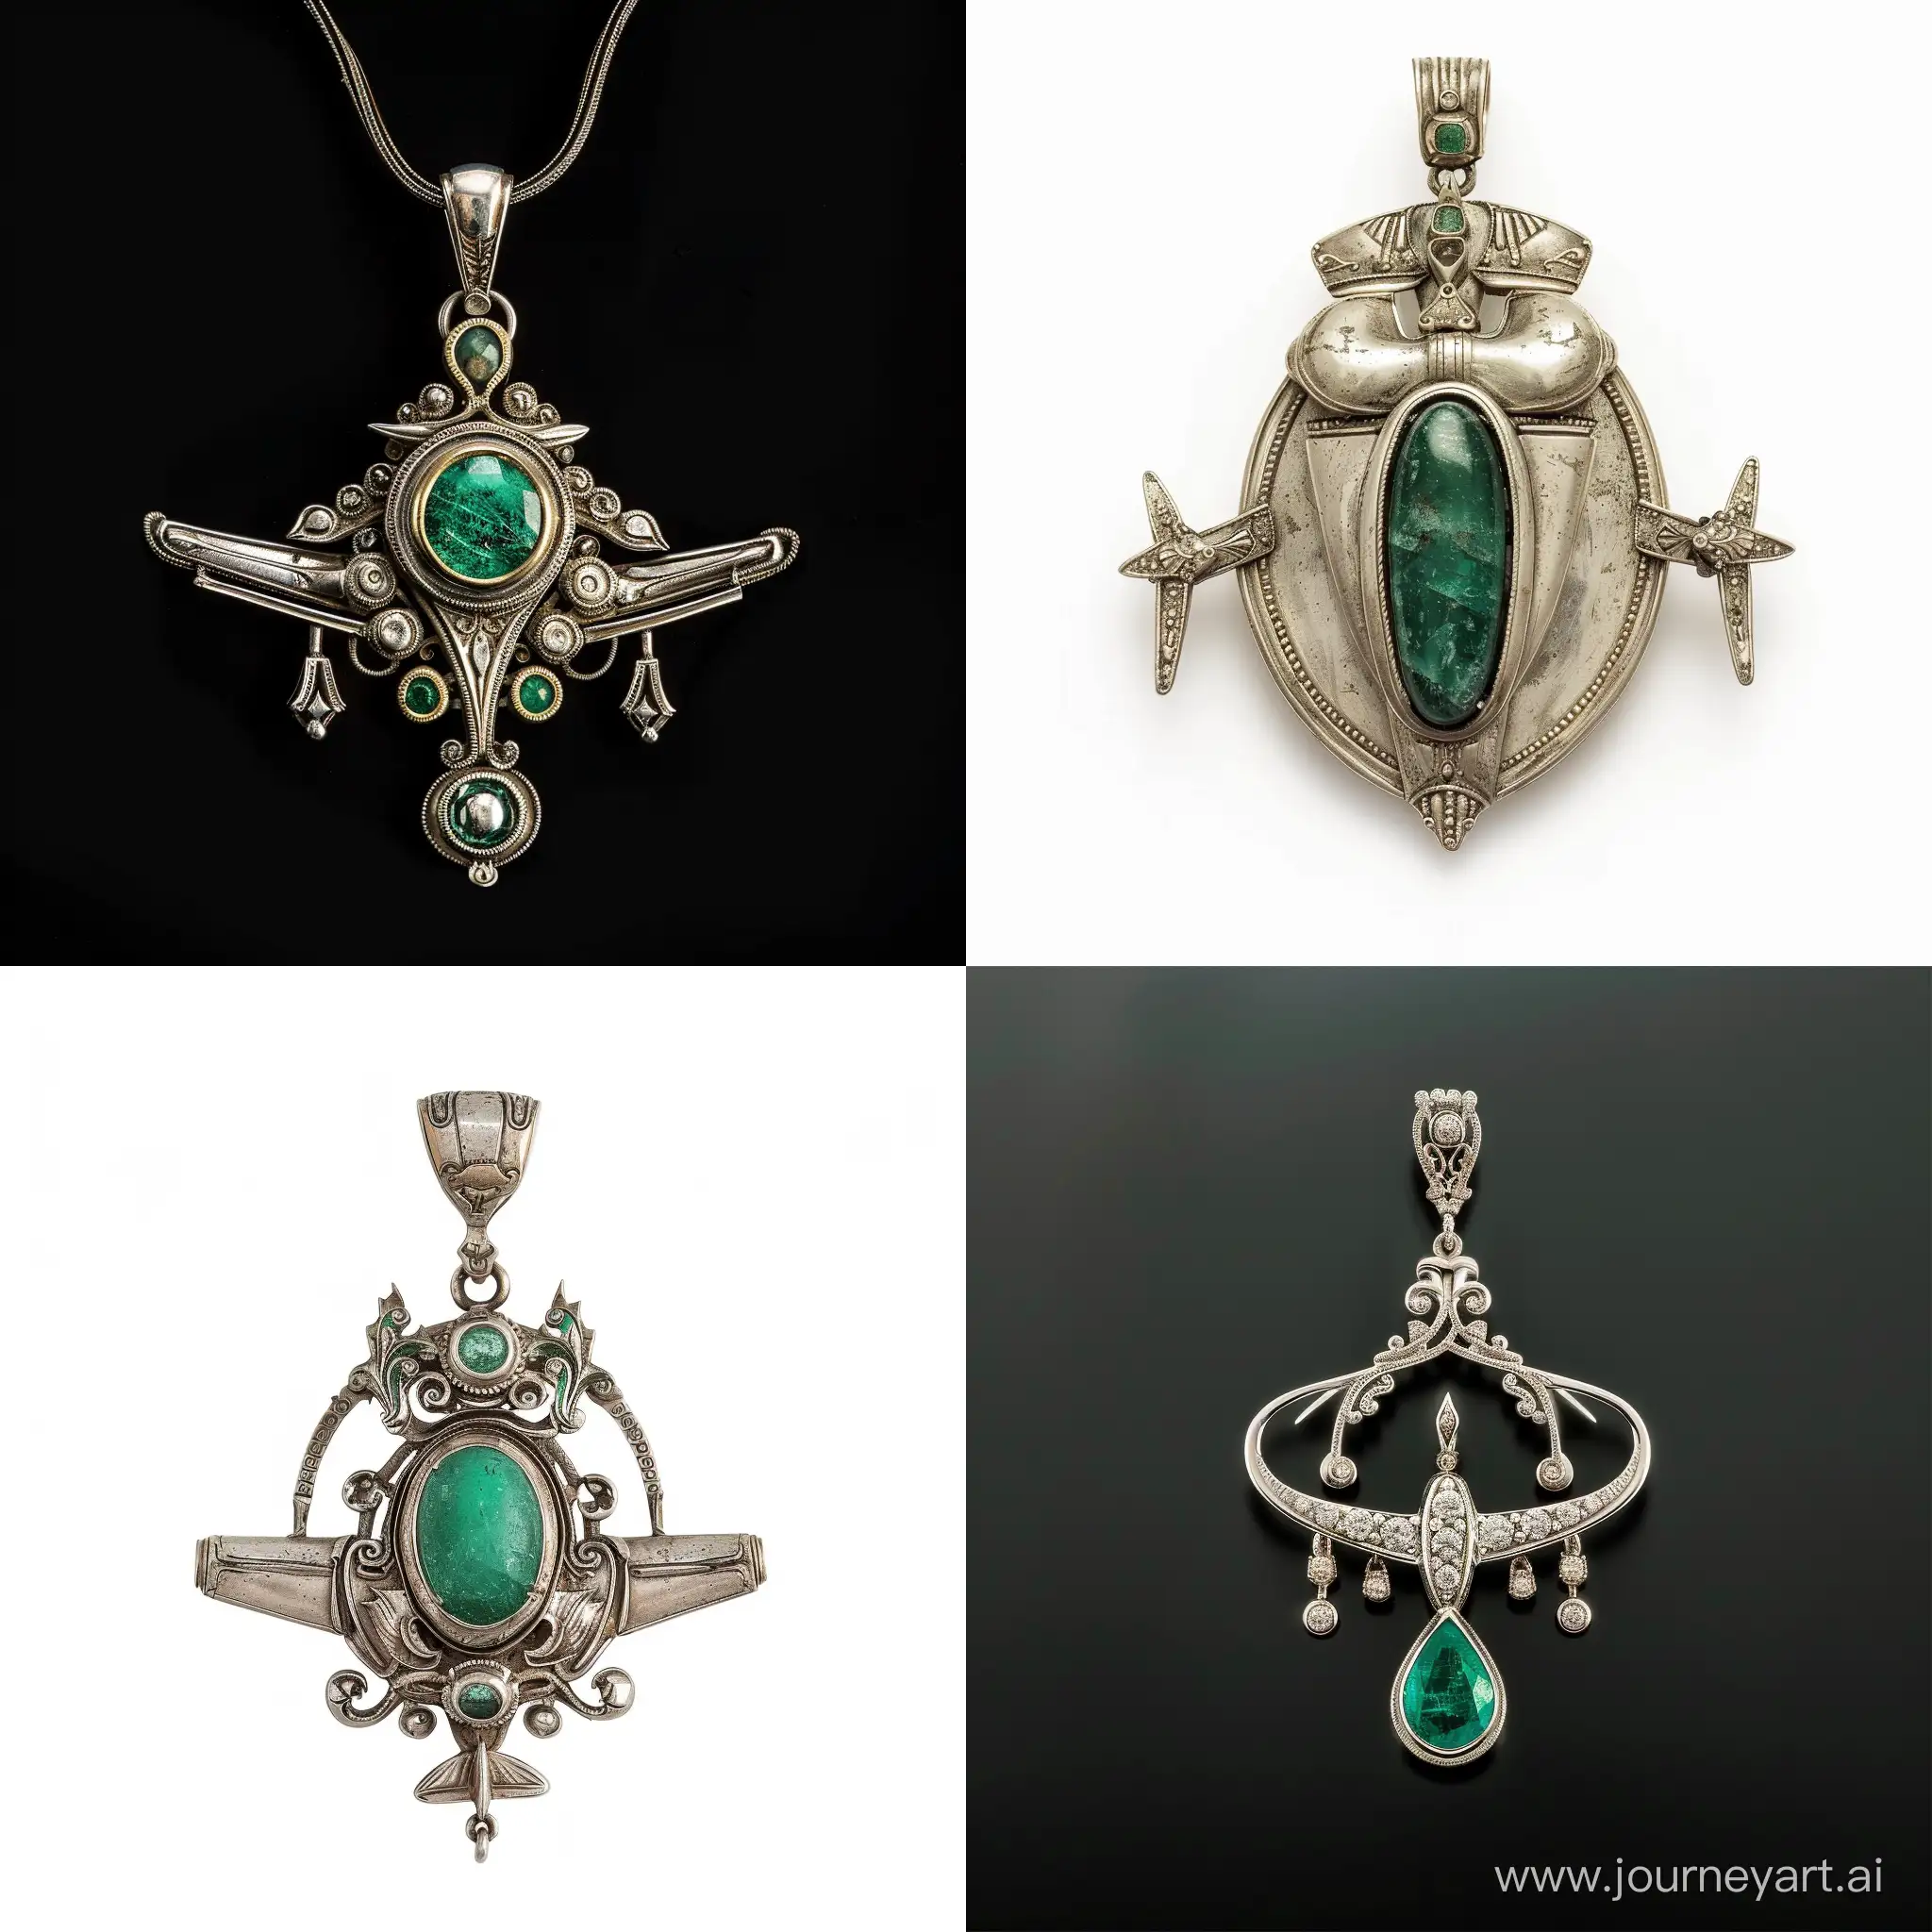 A pendant in the shape of an aeroplane with a piece of emerald in the centre, the rest of the pendant is decorated in white gold with fine ornamentation.